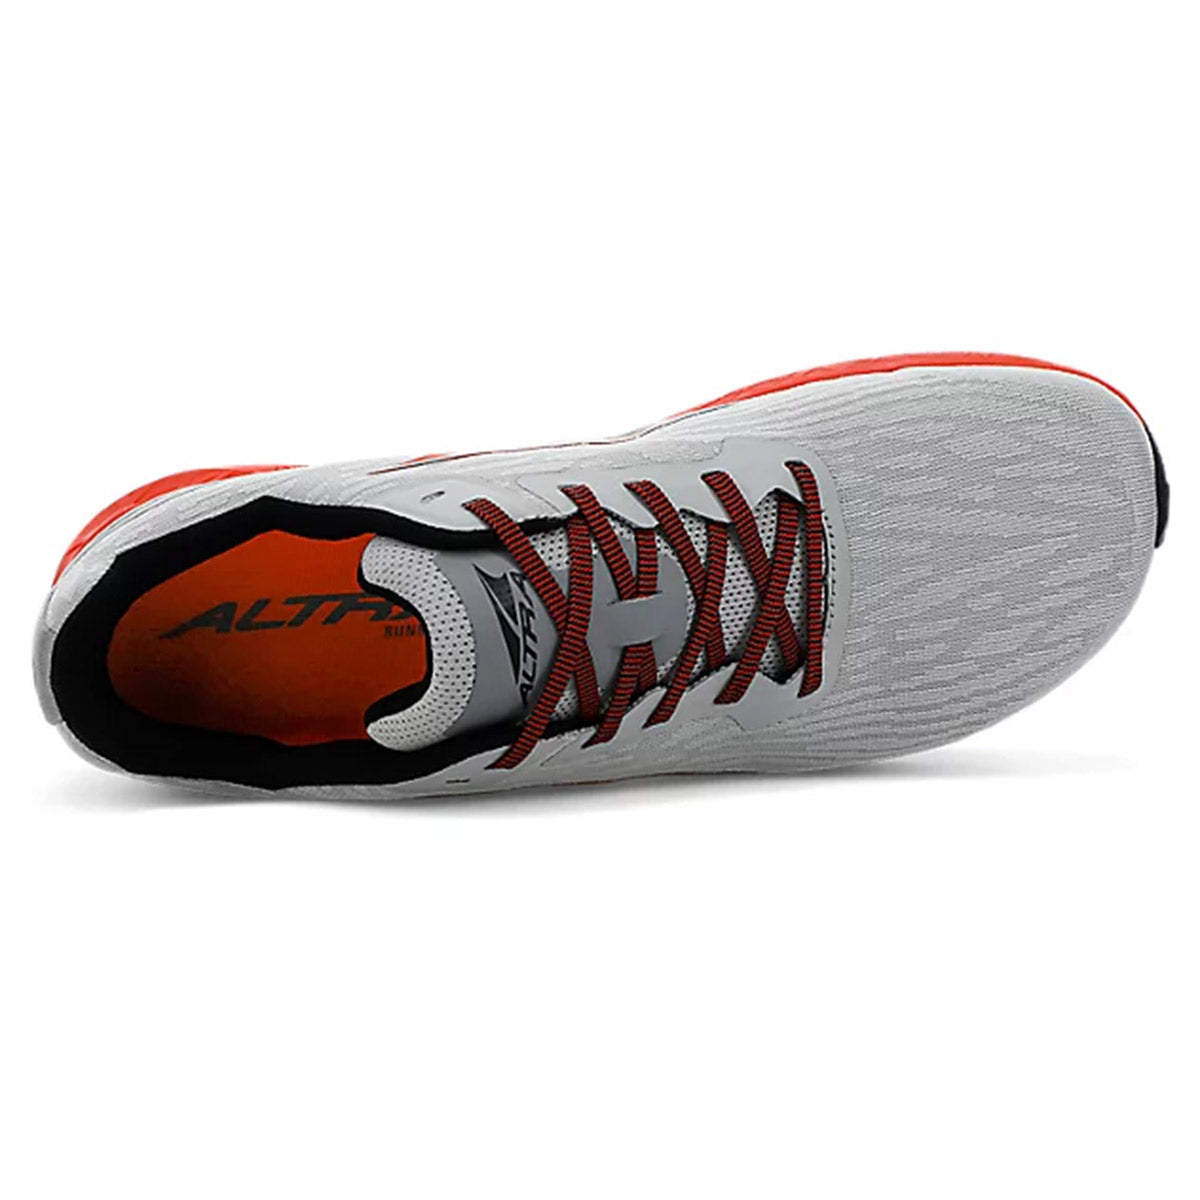 Top-down view of a gray and orange Altra Rivera running shoe with laces, featuring FootShape and Balanced Cushioning.